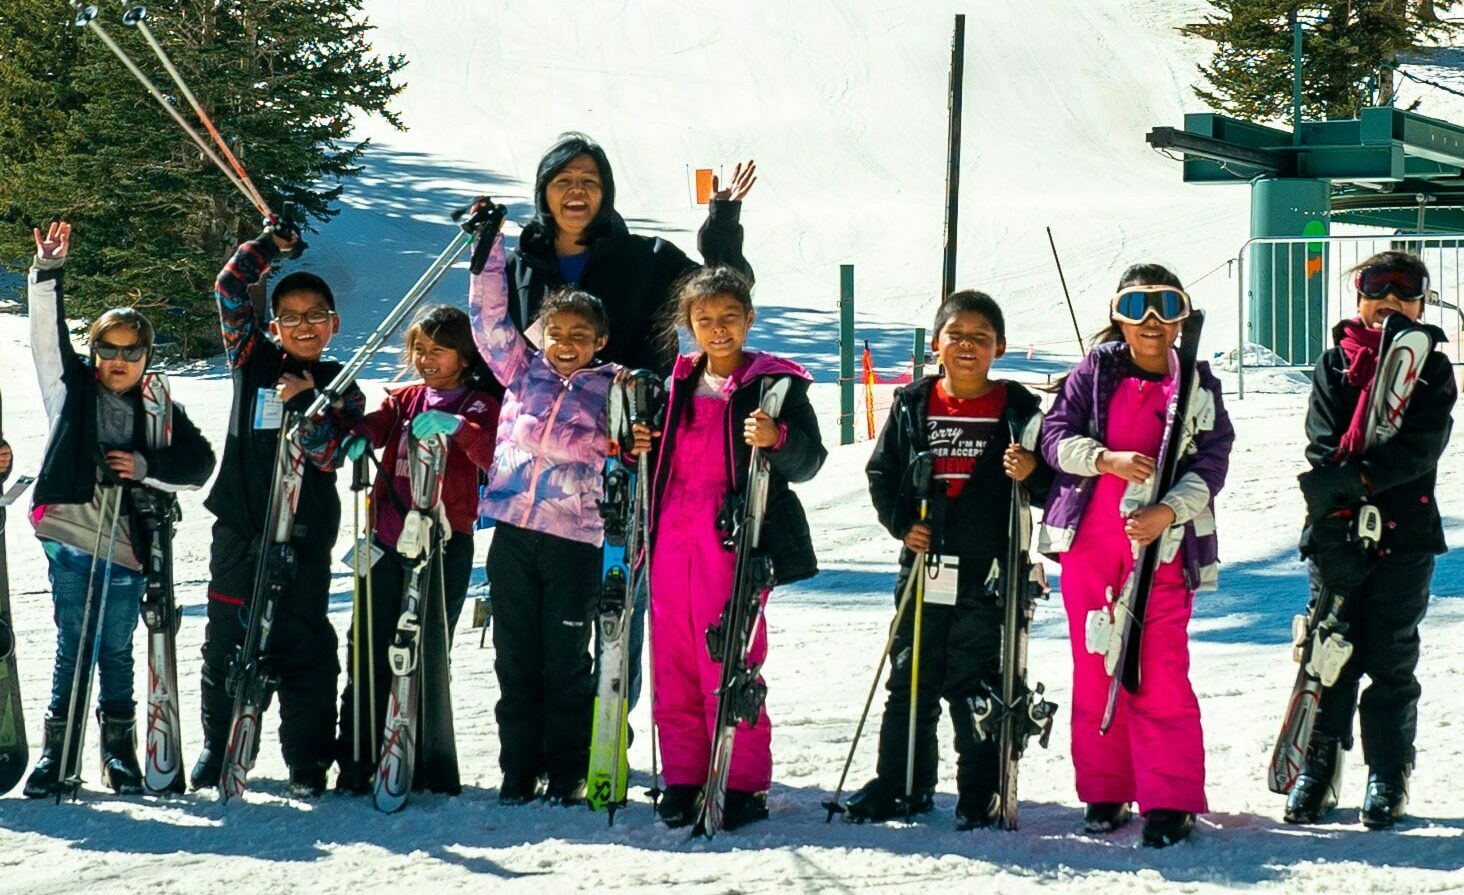 Group Ski and Ride Lessons